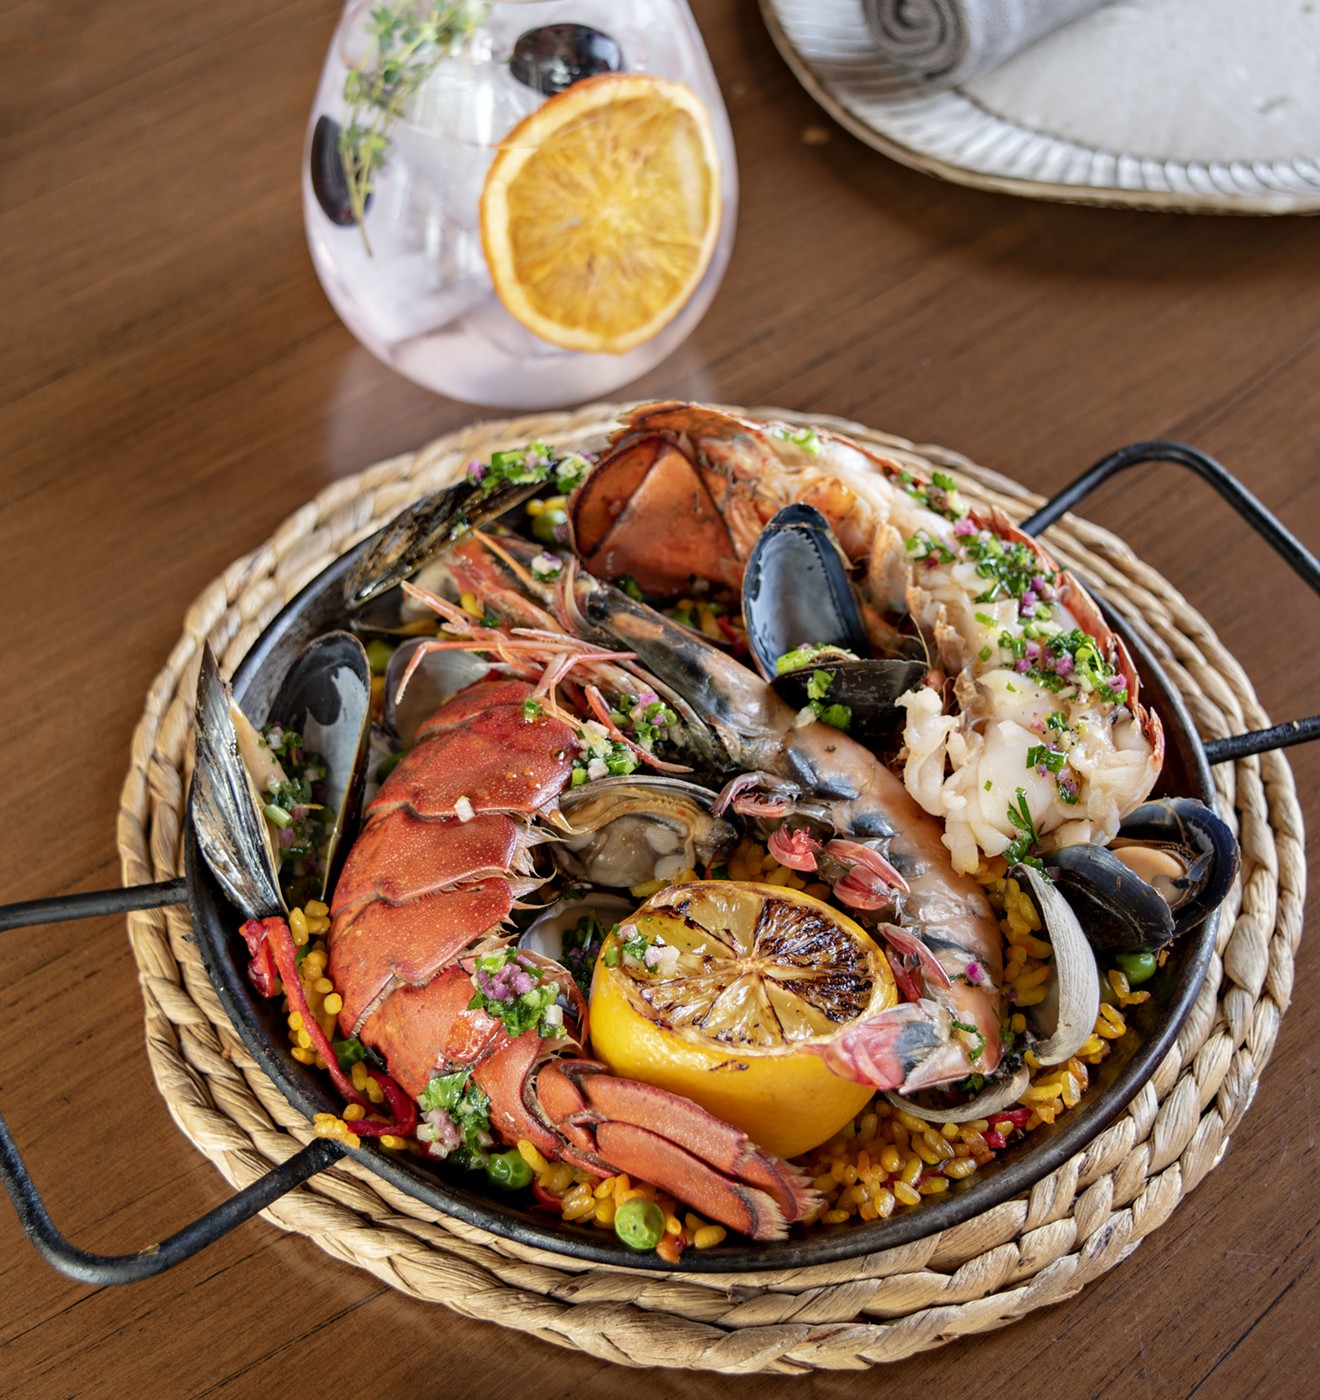 The show-stopping seafood paella from Talavera